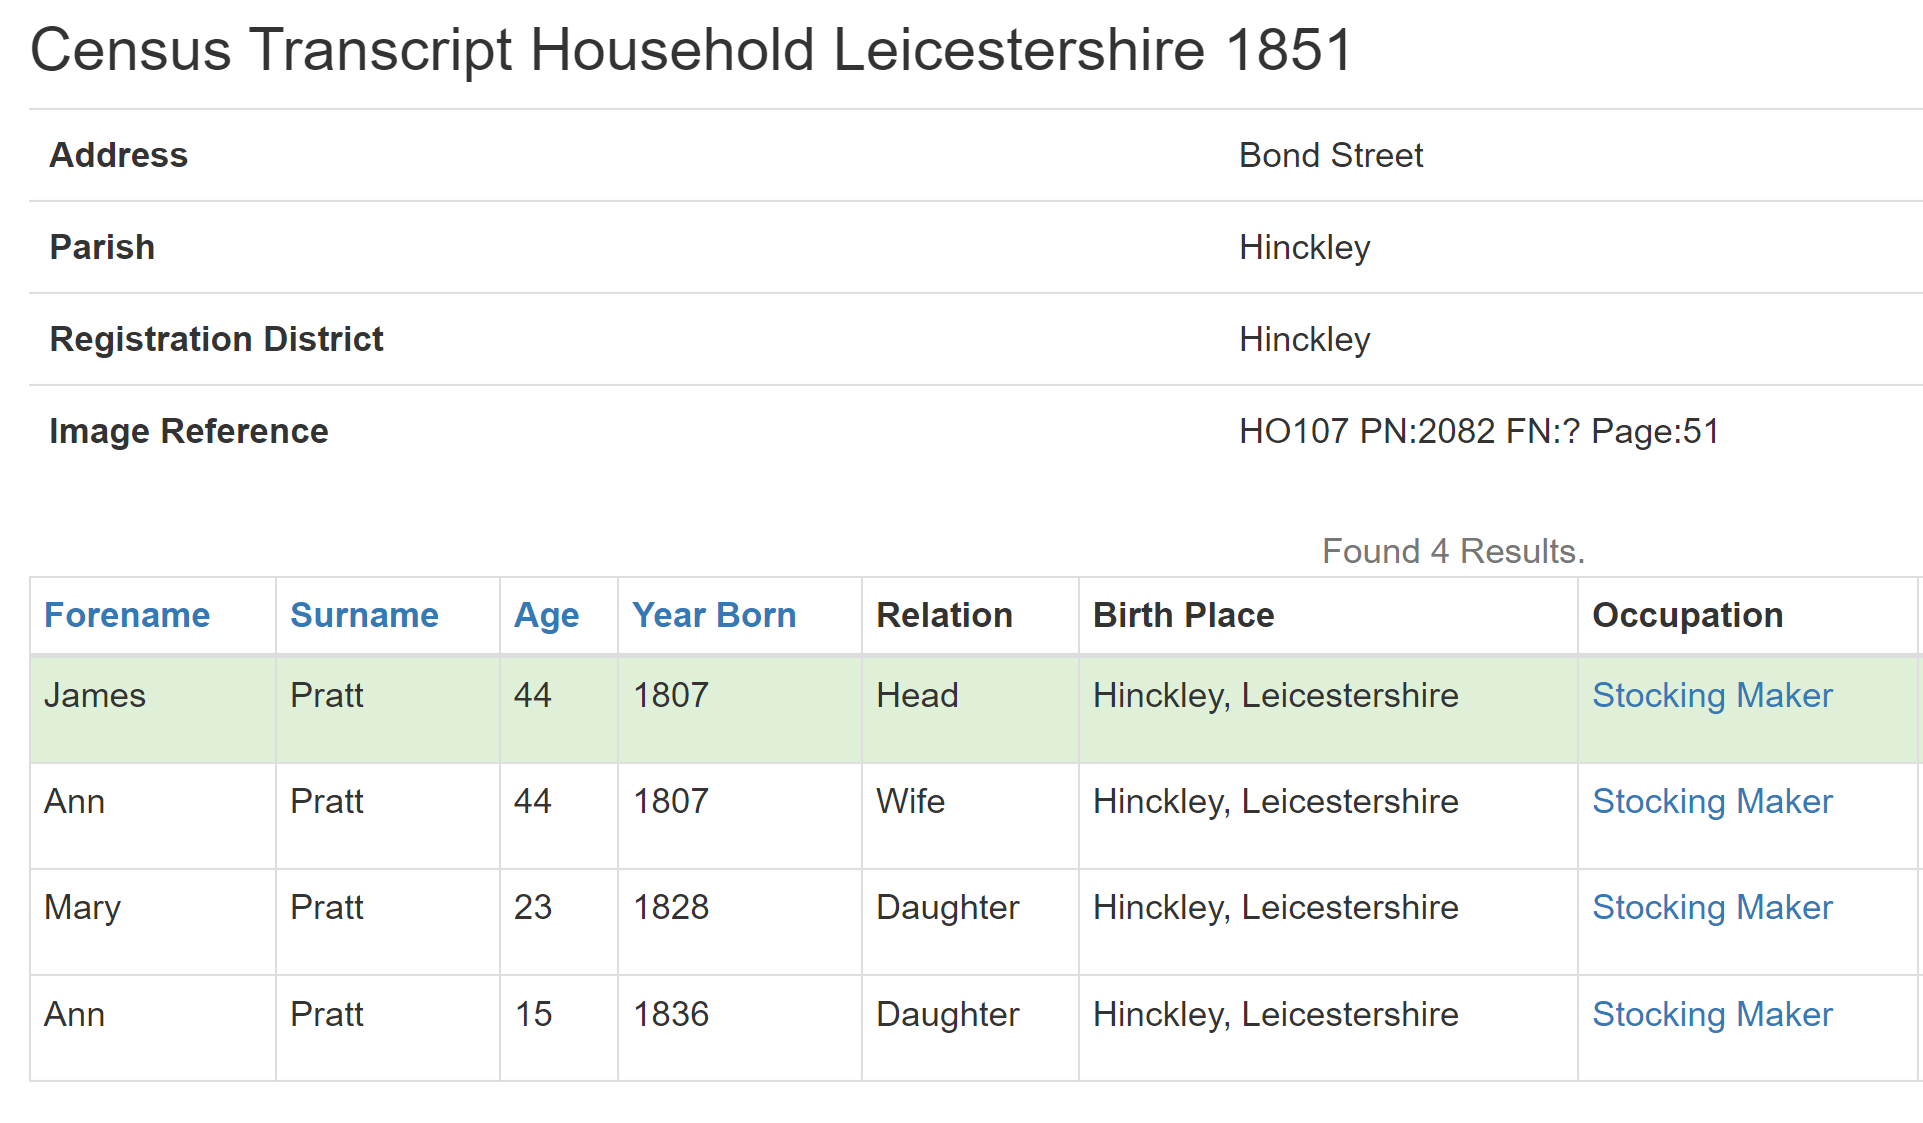 James and family in the 1851 Census